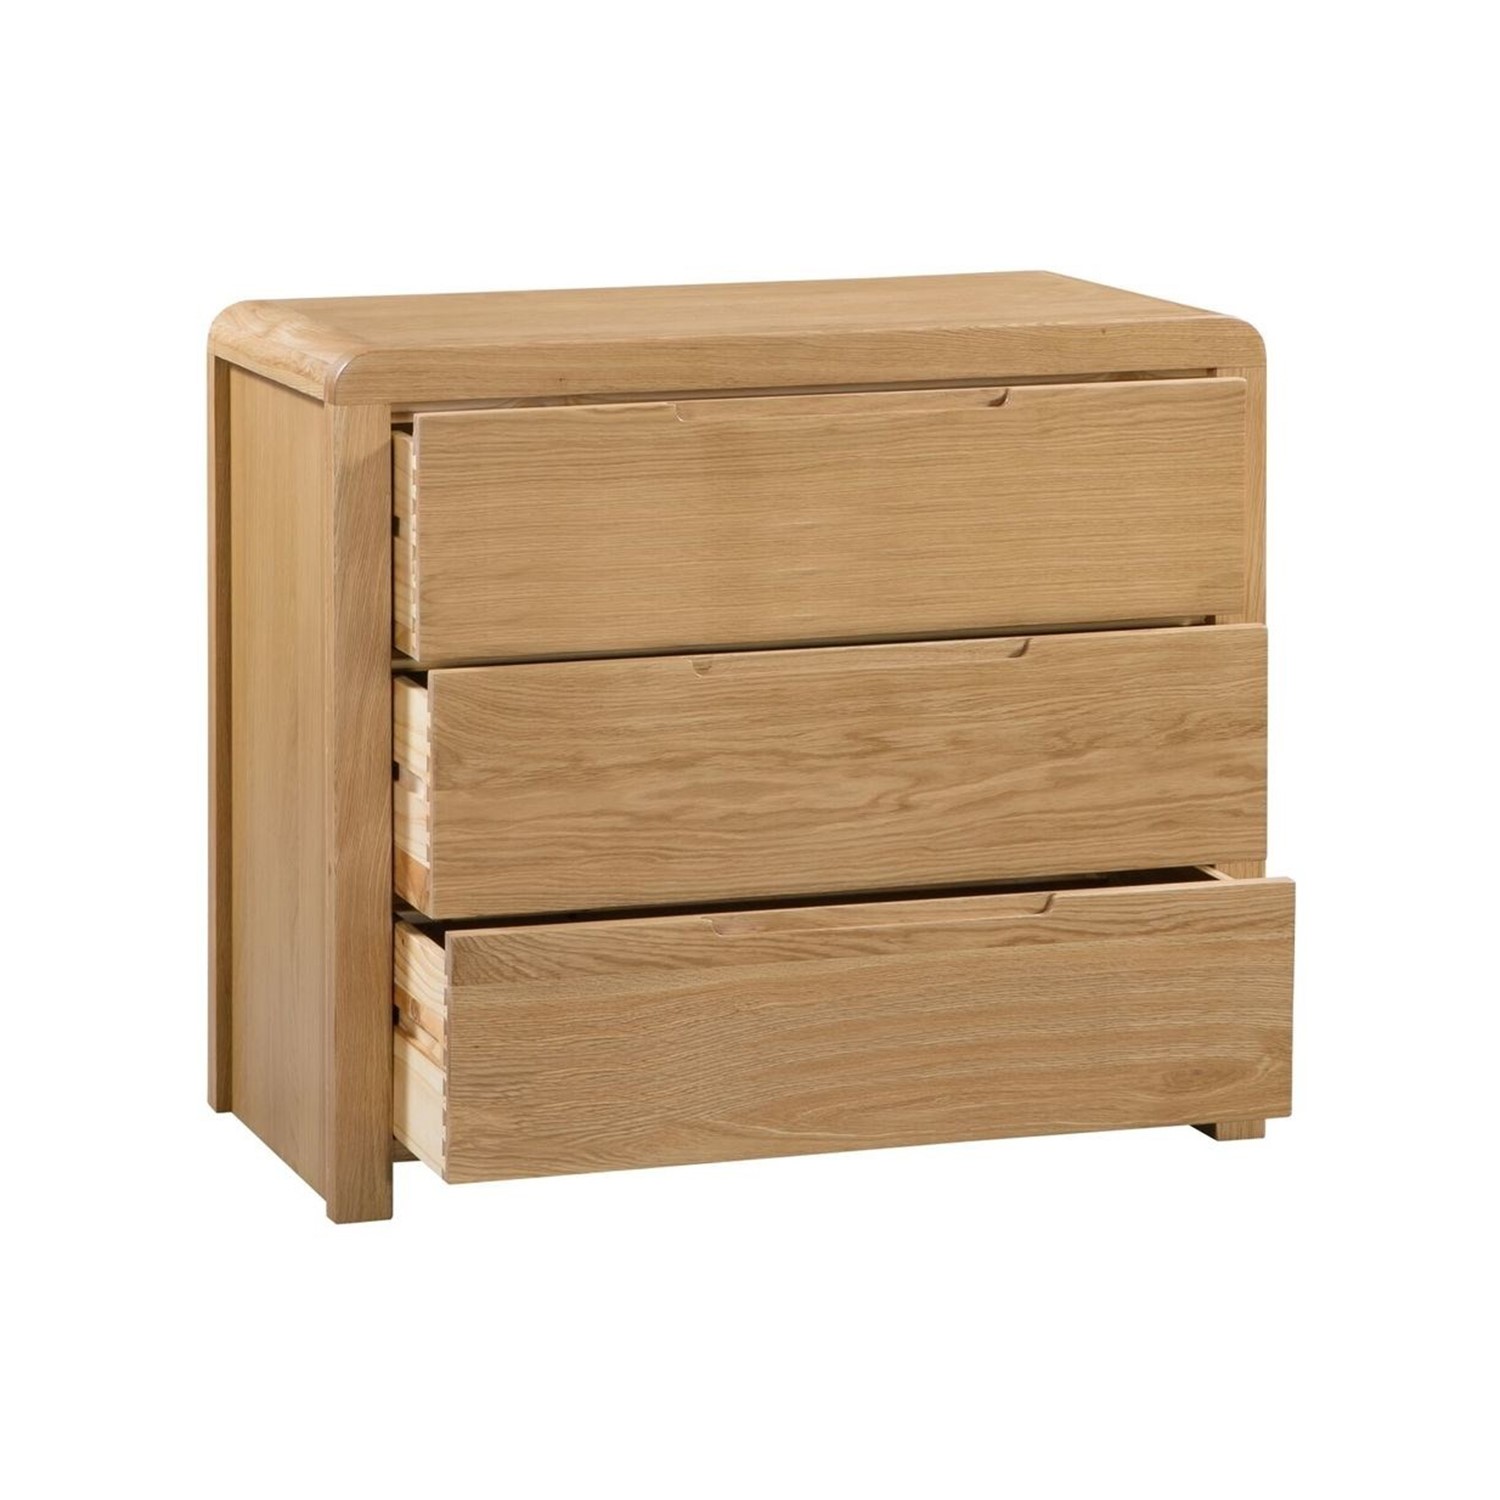 Read more about Curved oak modern chest of 3 drawers julian bowen